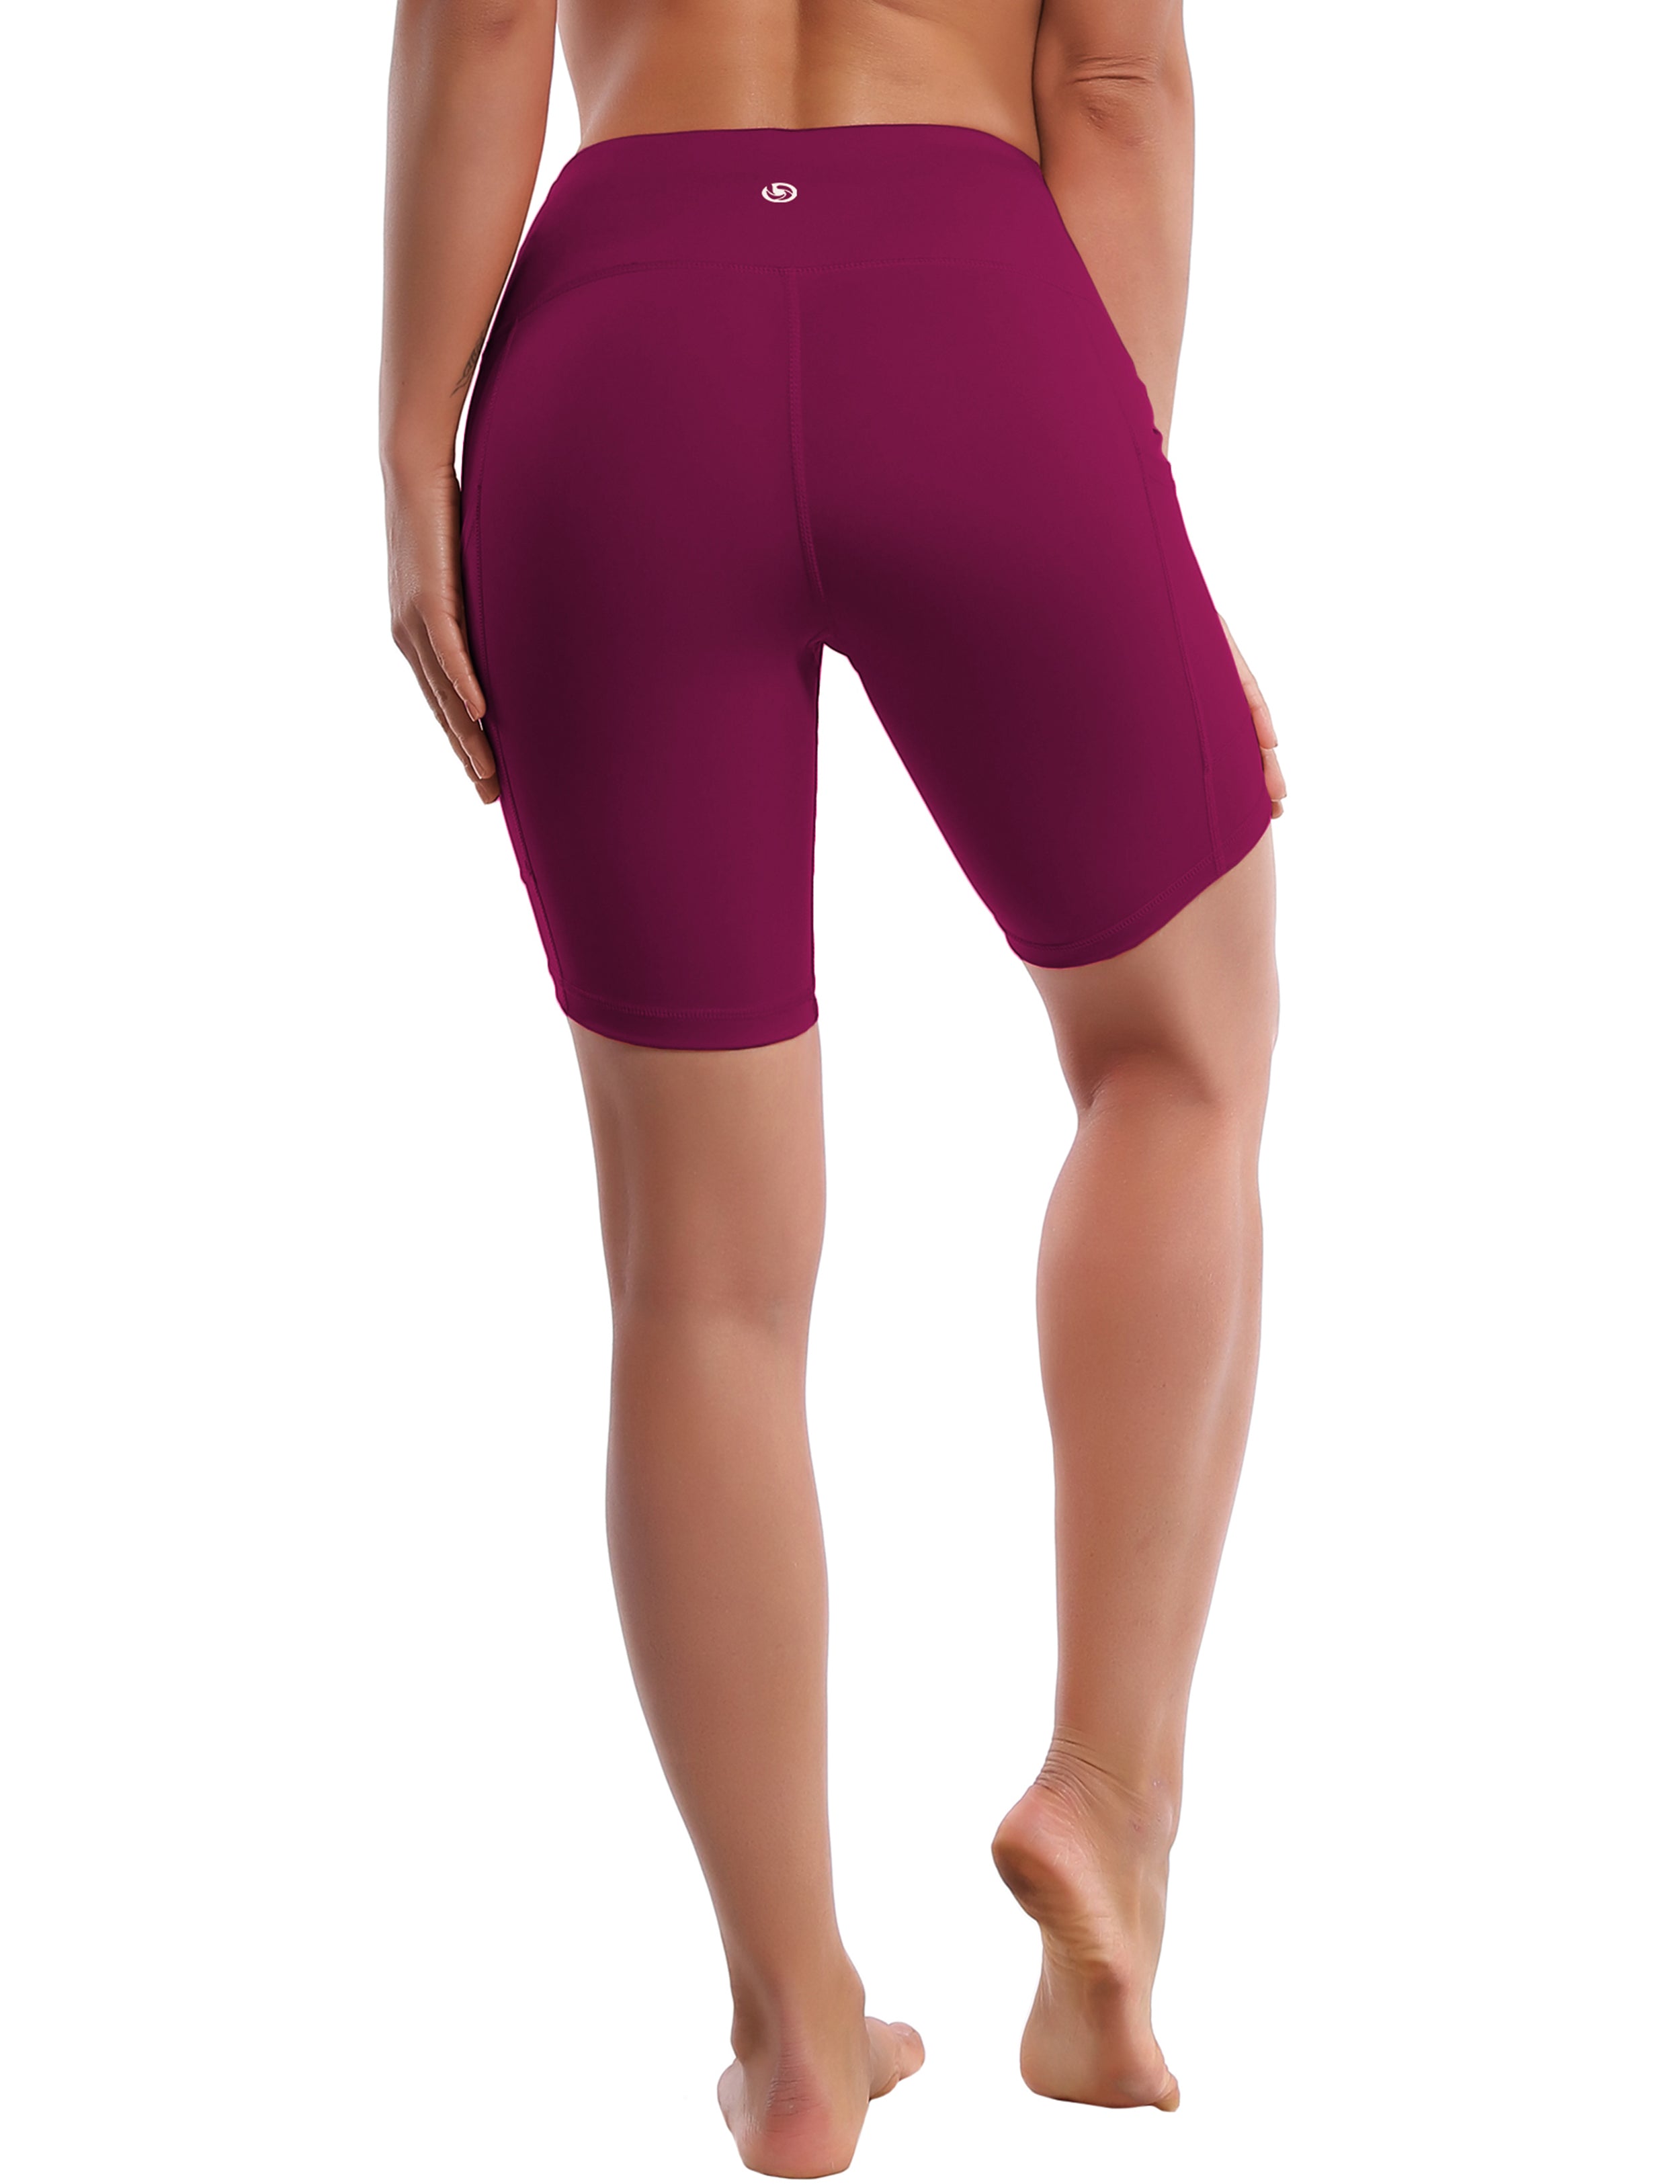 8" Side Pockets Golf Shorts grapevine Sleek, soft, smooth and totally comfortable: our newest style is here. Softest-ever fabric High elasticity High density 4-way stretch Fabric doesn't attract lint easily No see-through Moisture-wicking Machine wash 75% Nylon, 25% Spandex